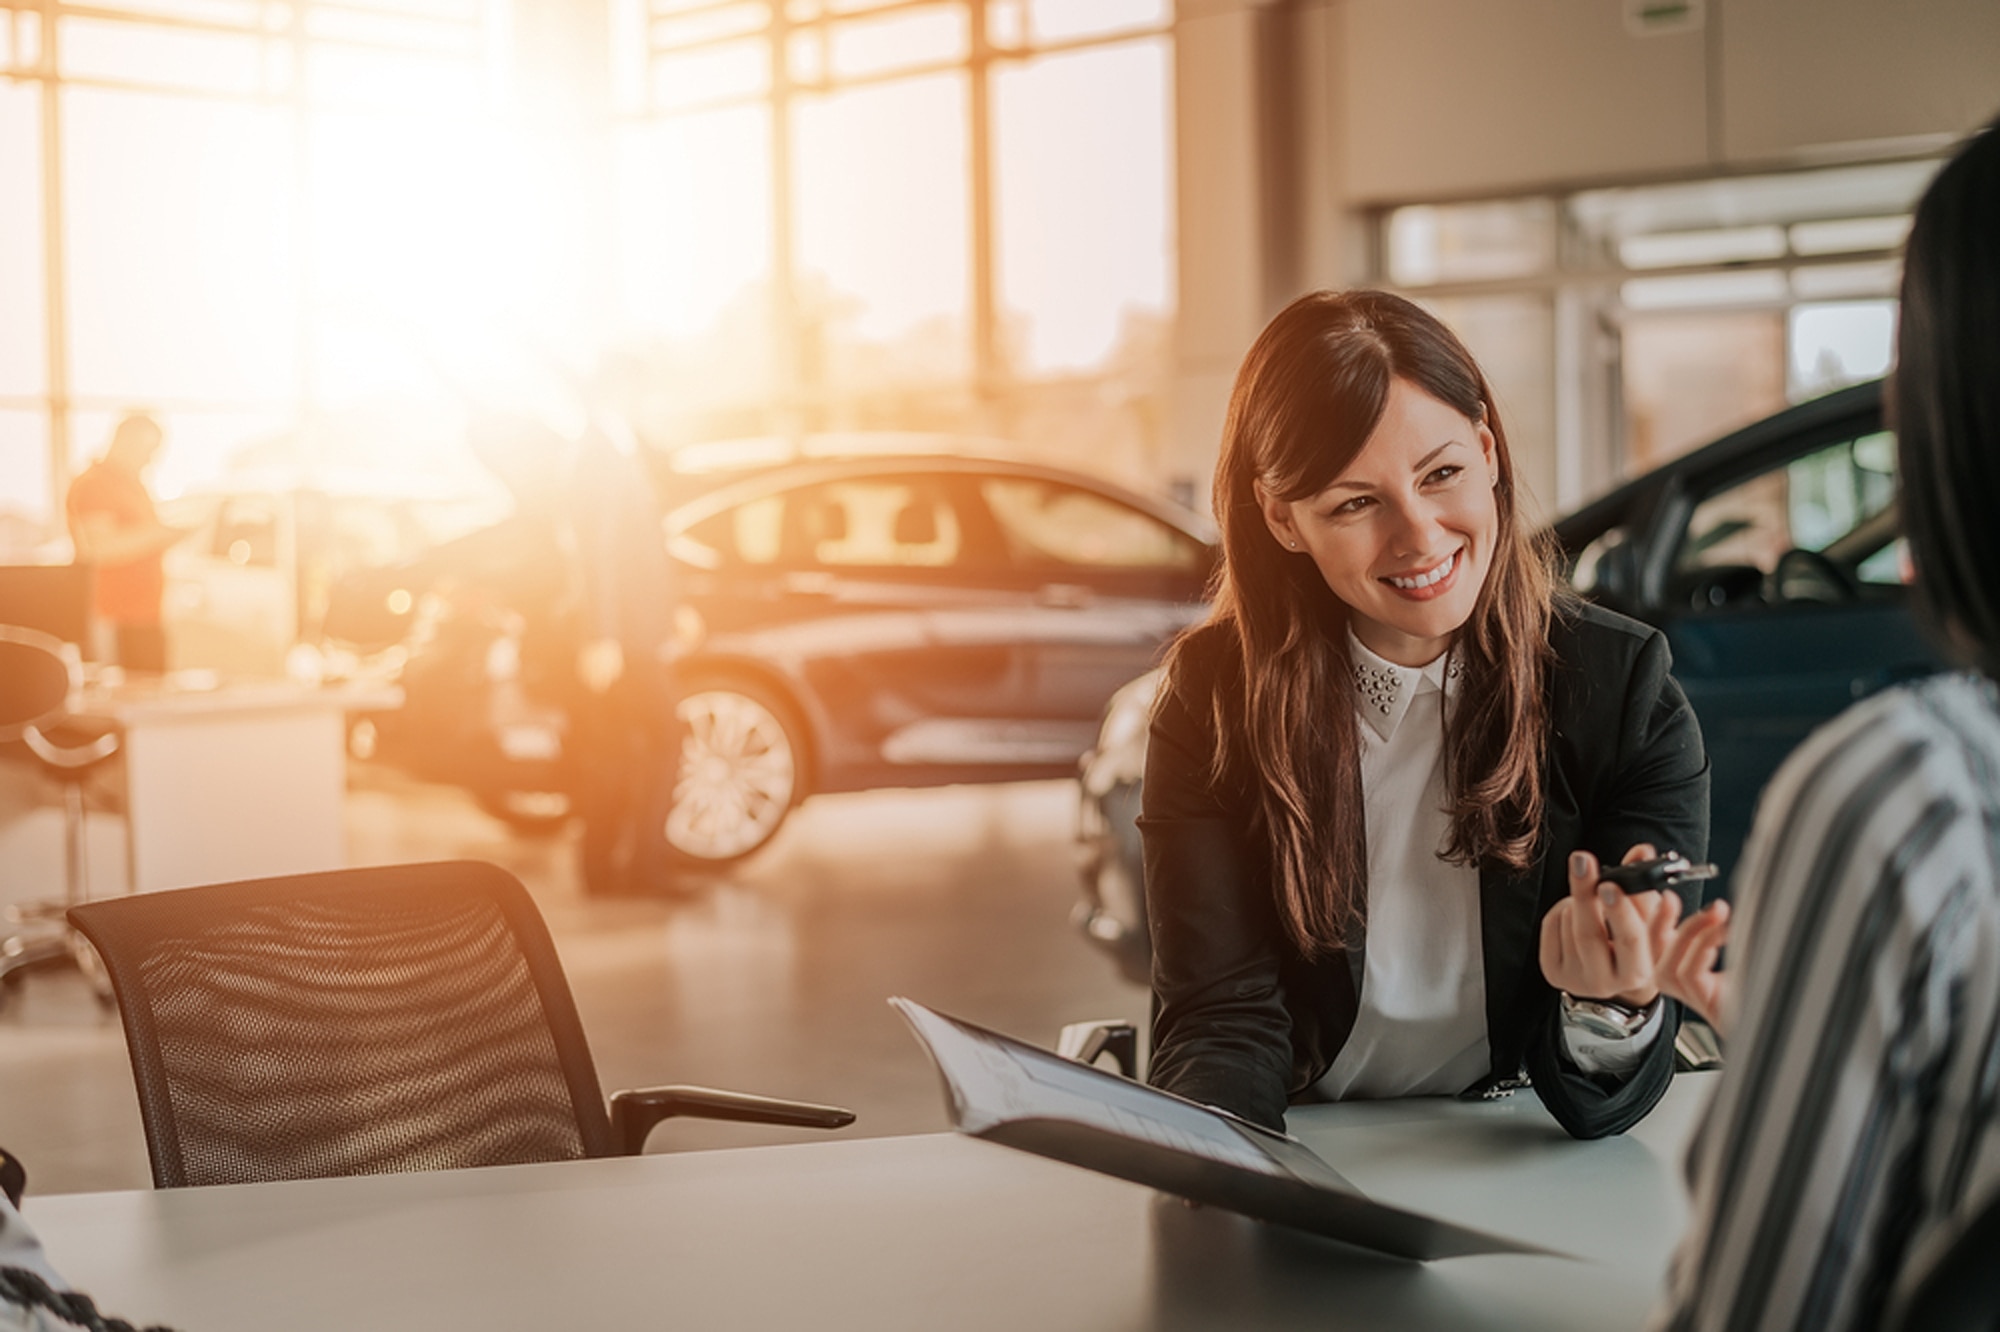 7 Tactics Car Salespeople Hope You Don't Know